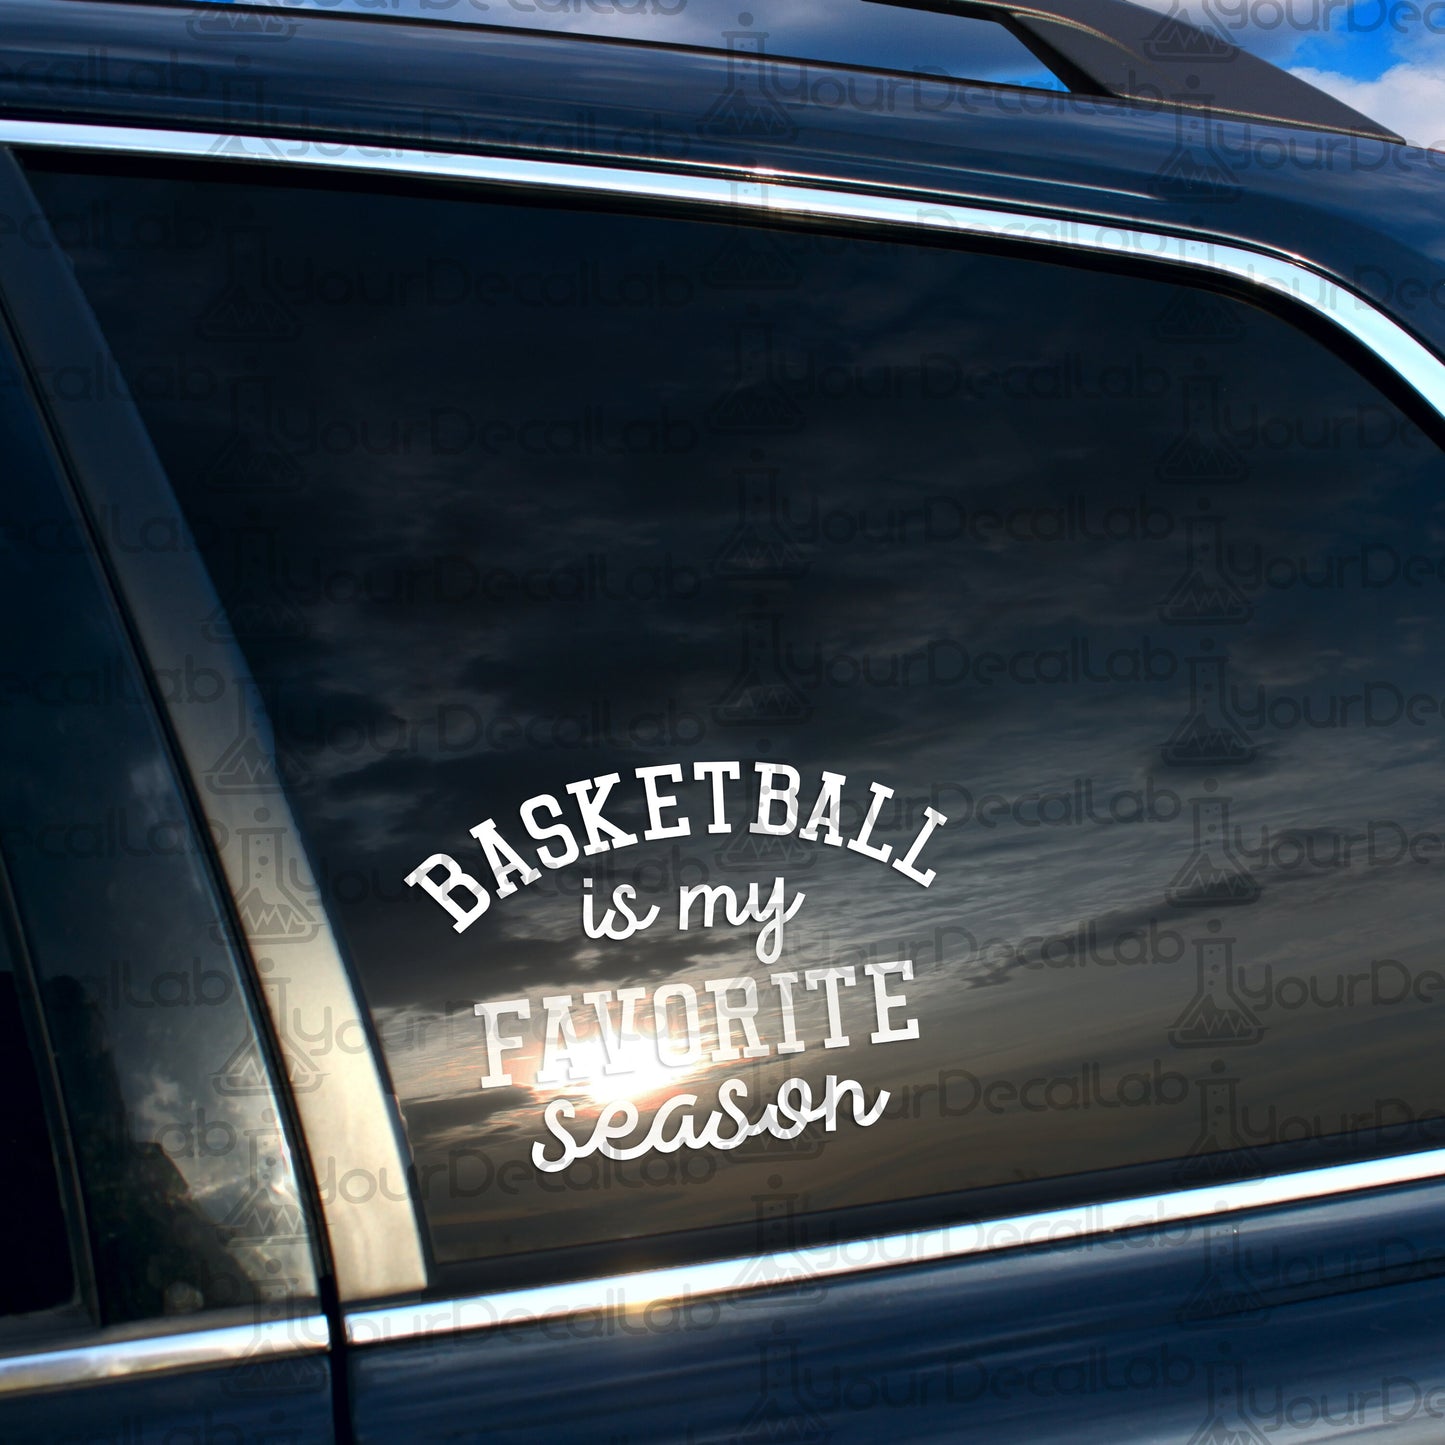 a car with a basketball is my favorite season sticker on it